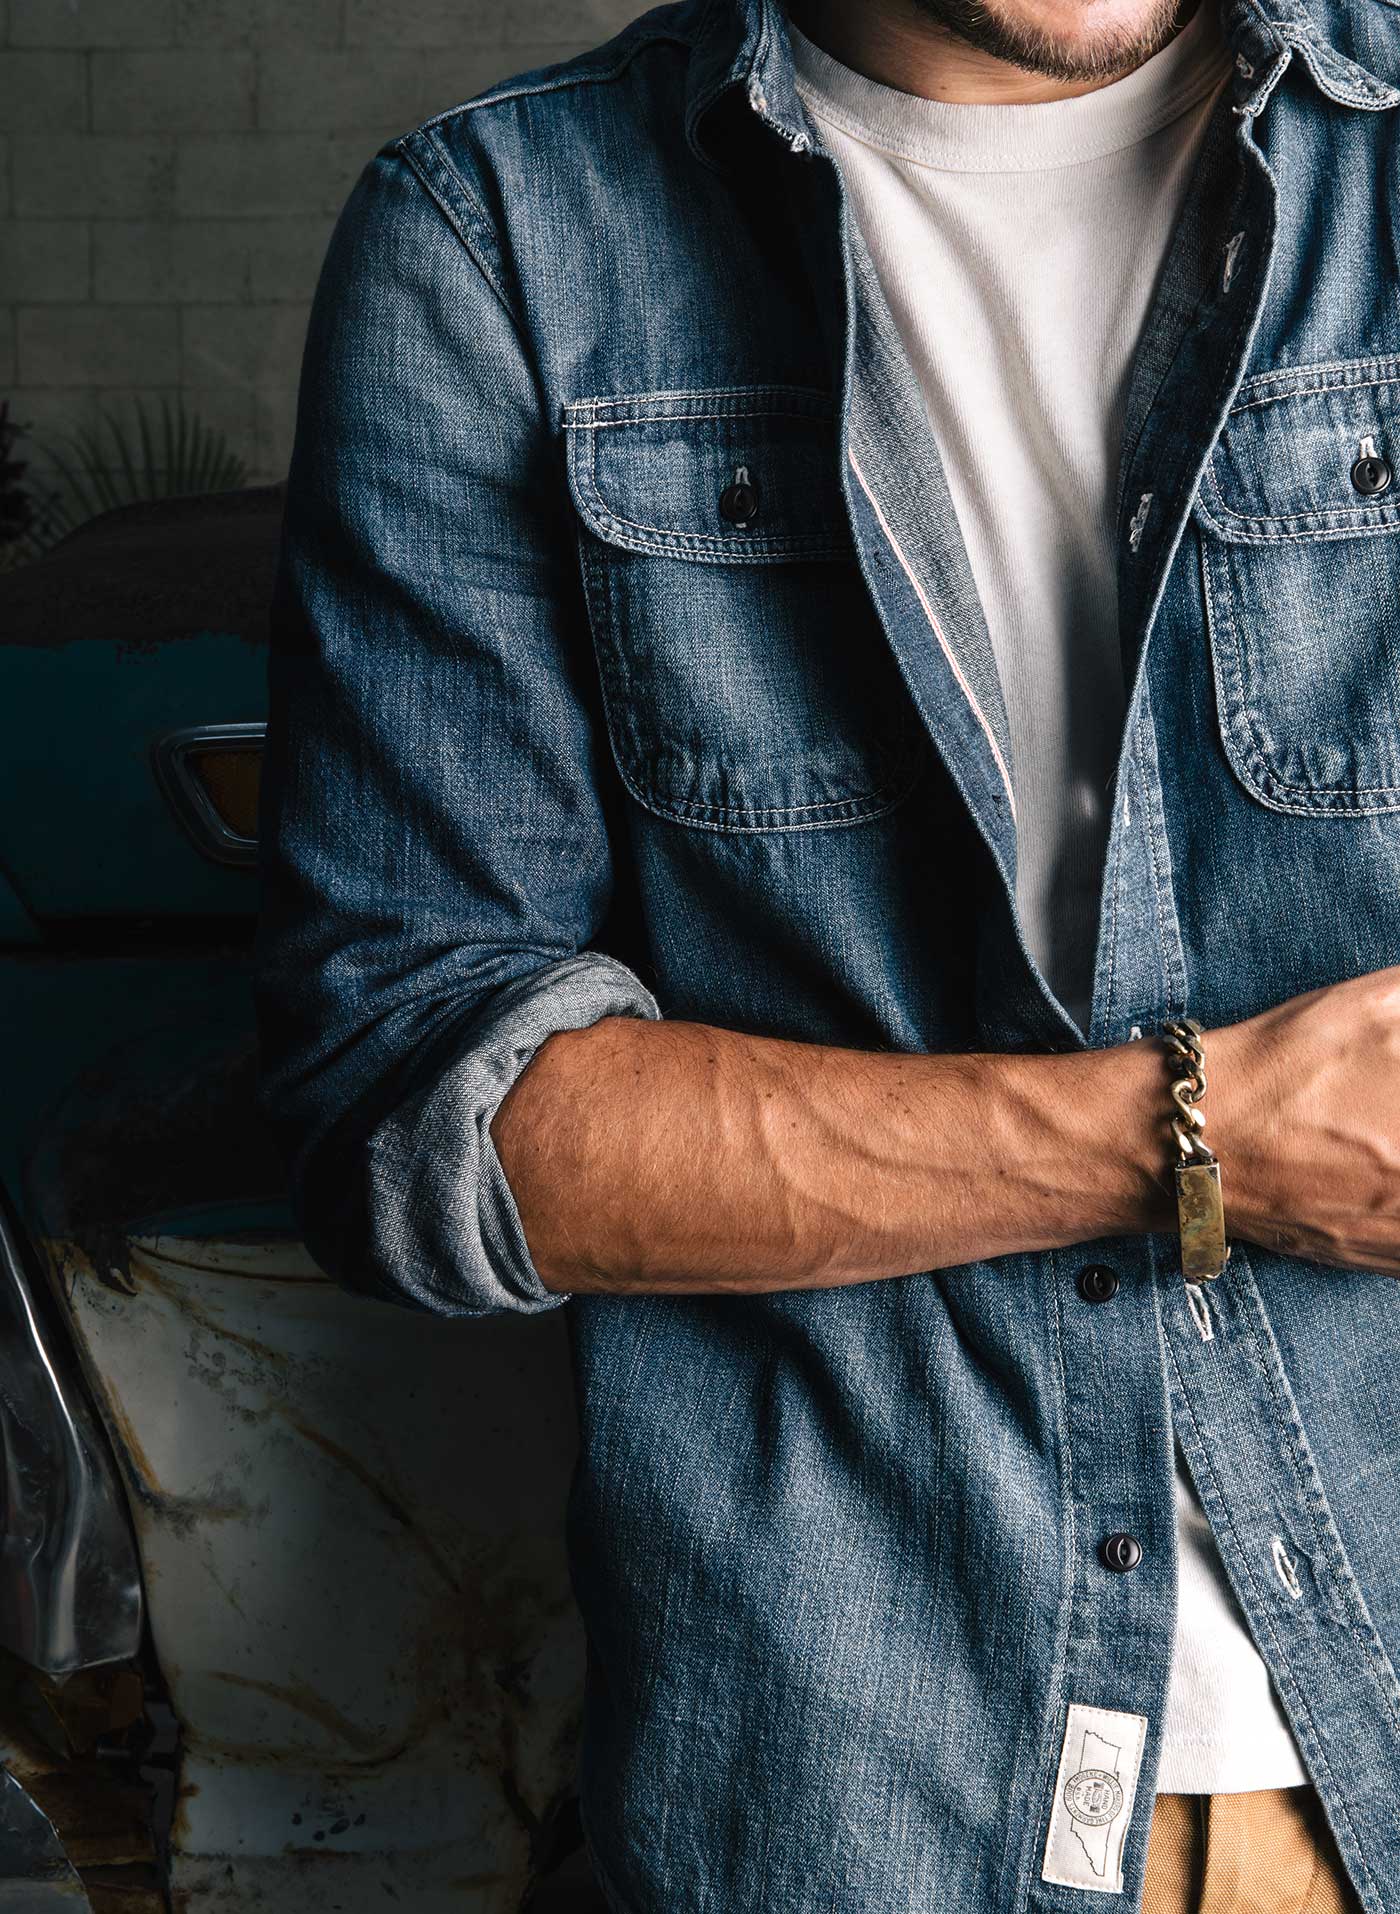 The Do's and Don'ts Of Wearing Denims | Denim shirt men, Mens denim shirt  outfit, Denim shirt style